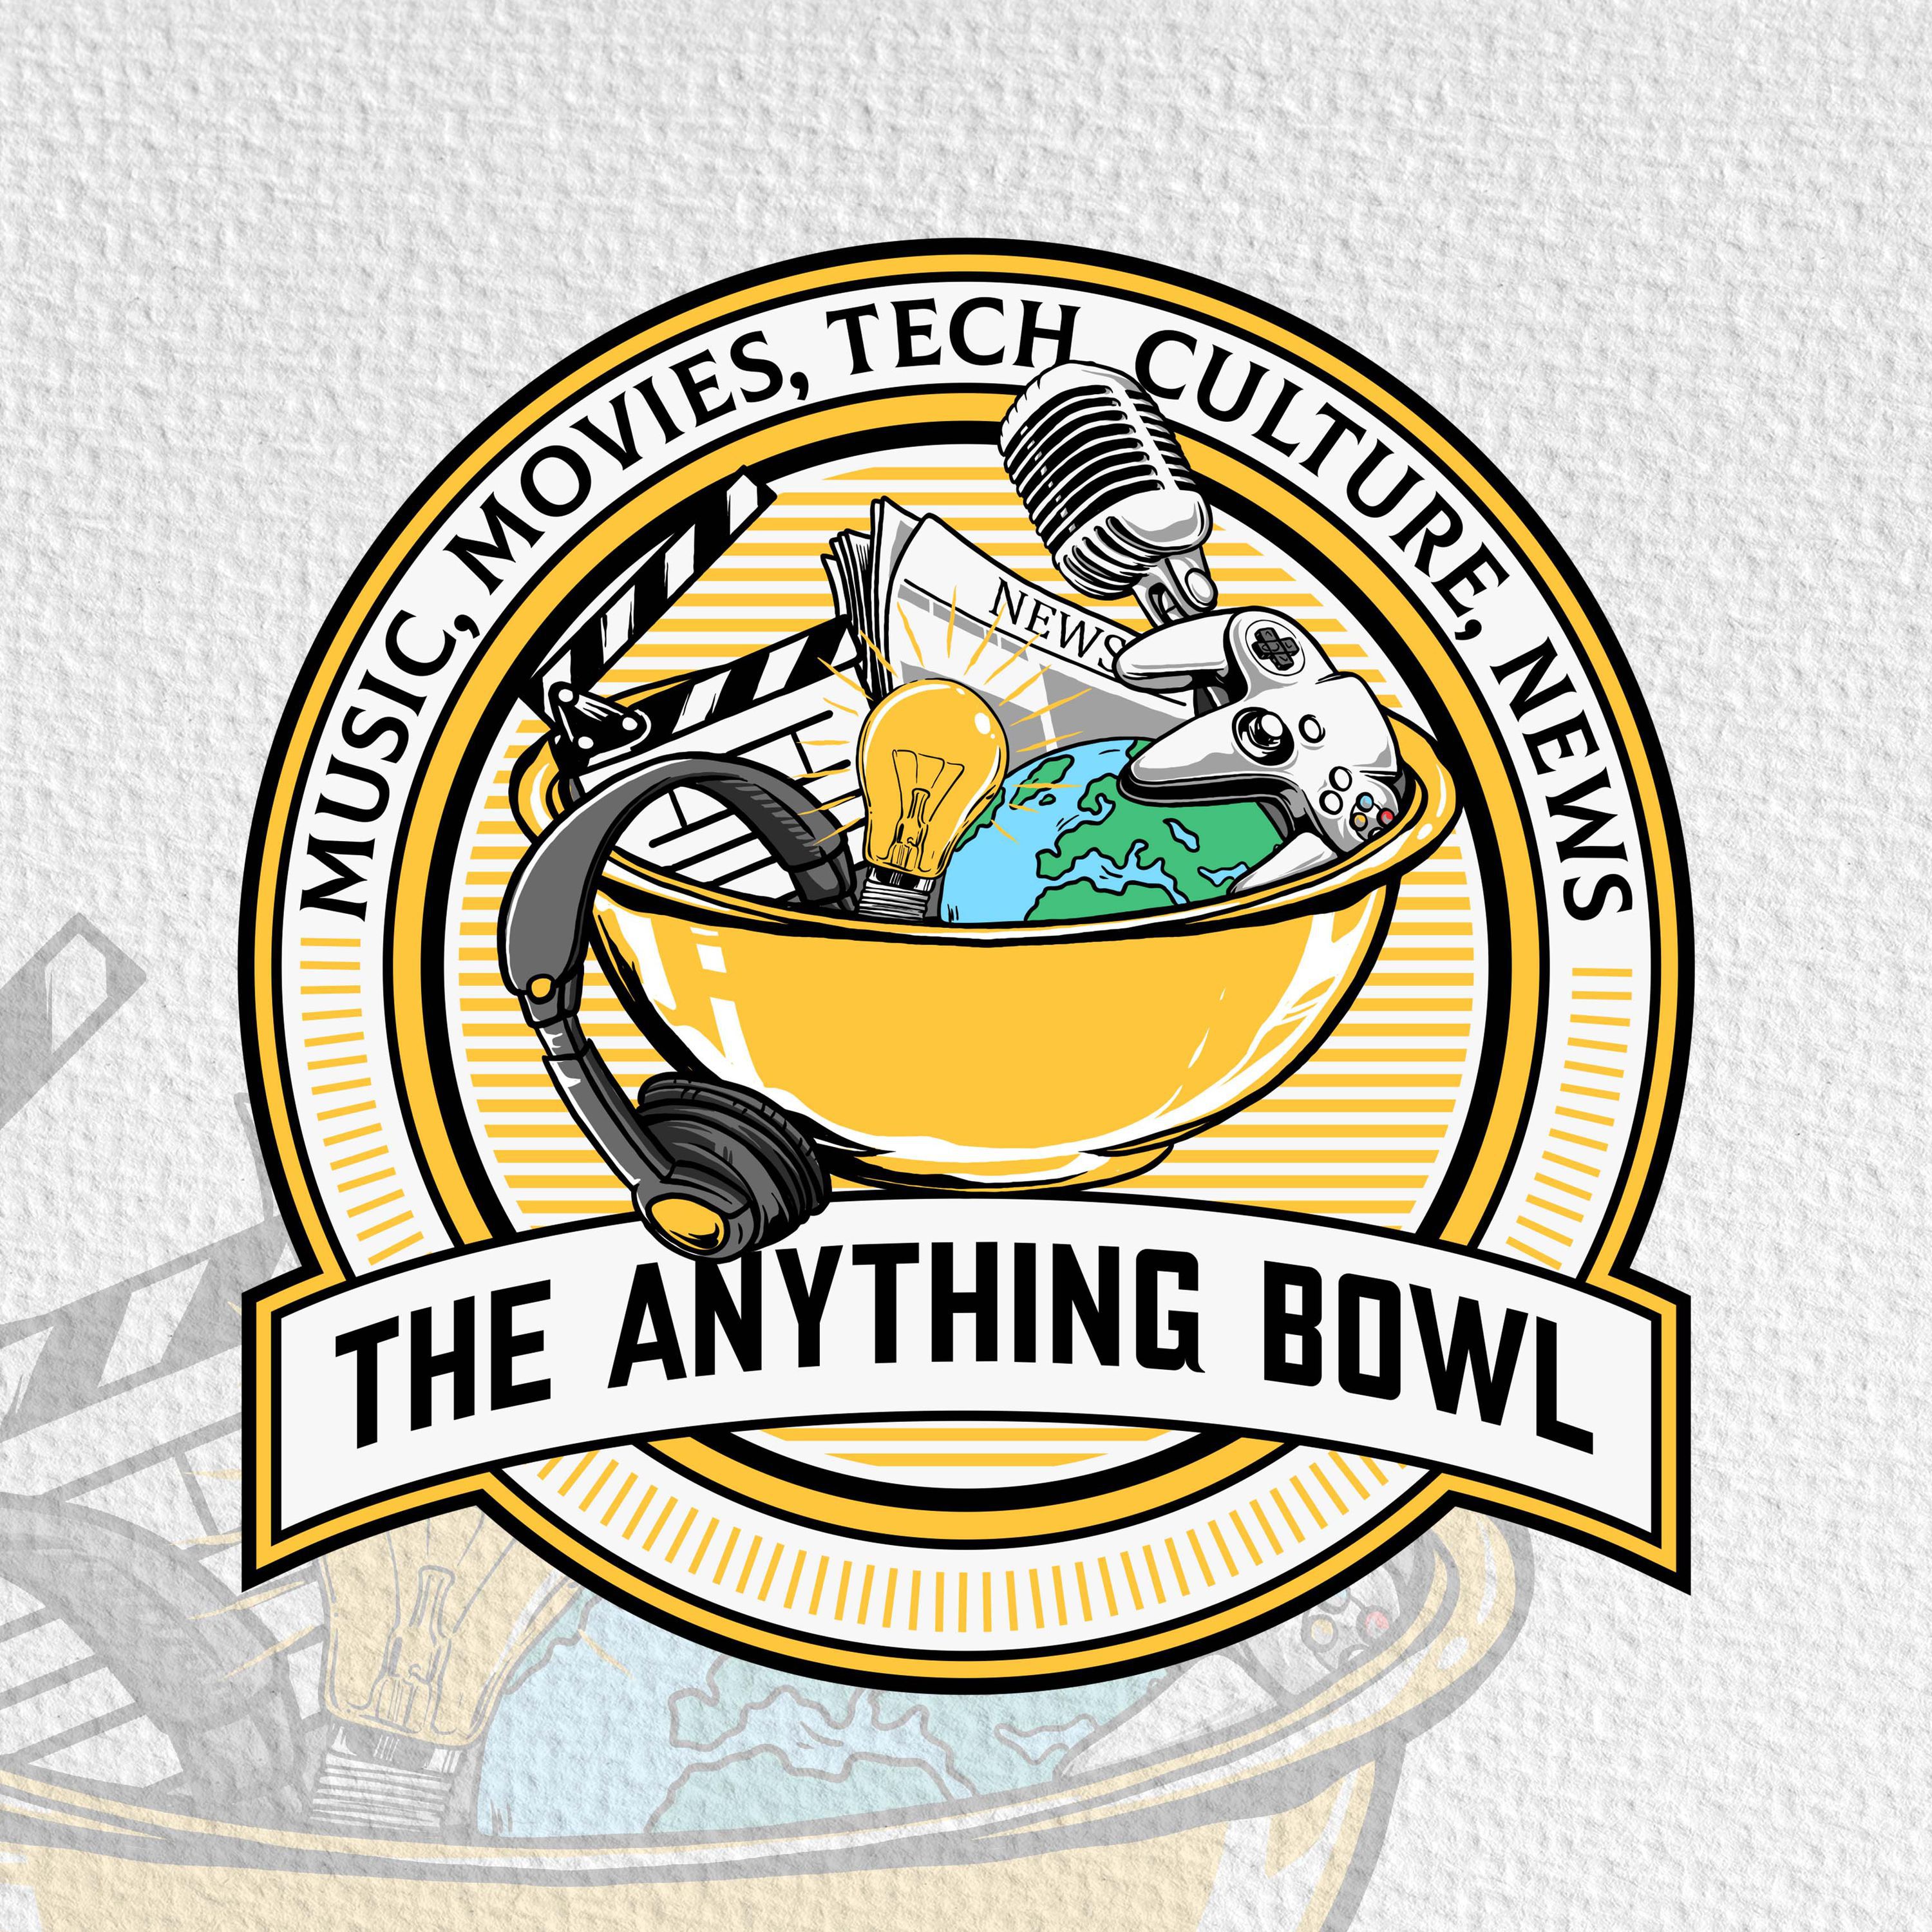 The Anything Bowl